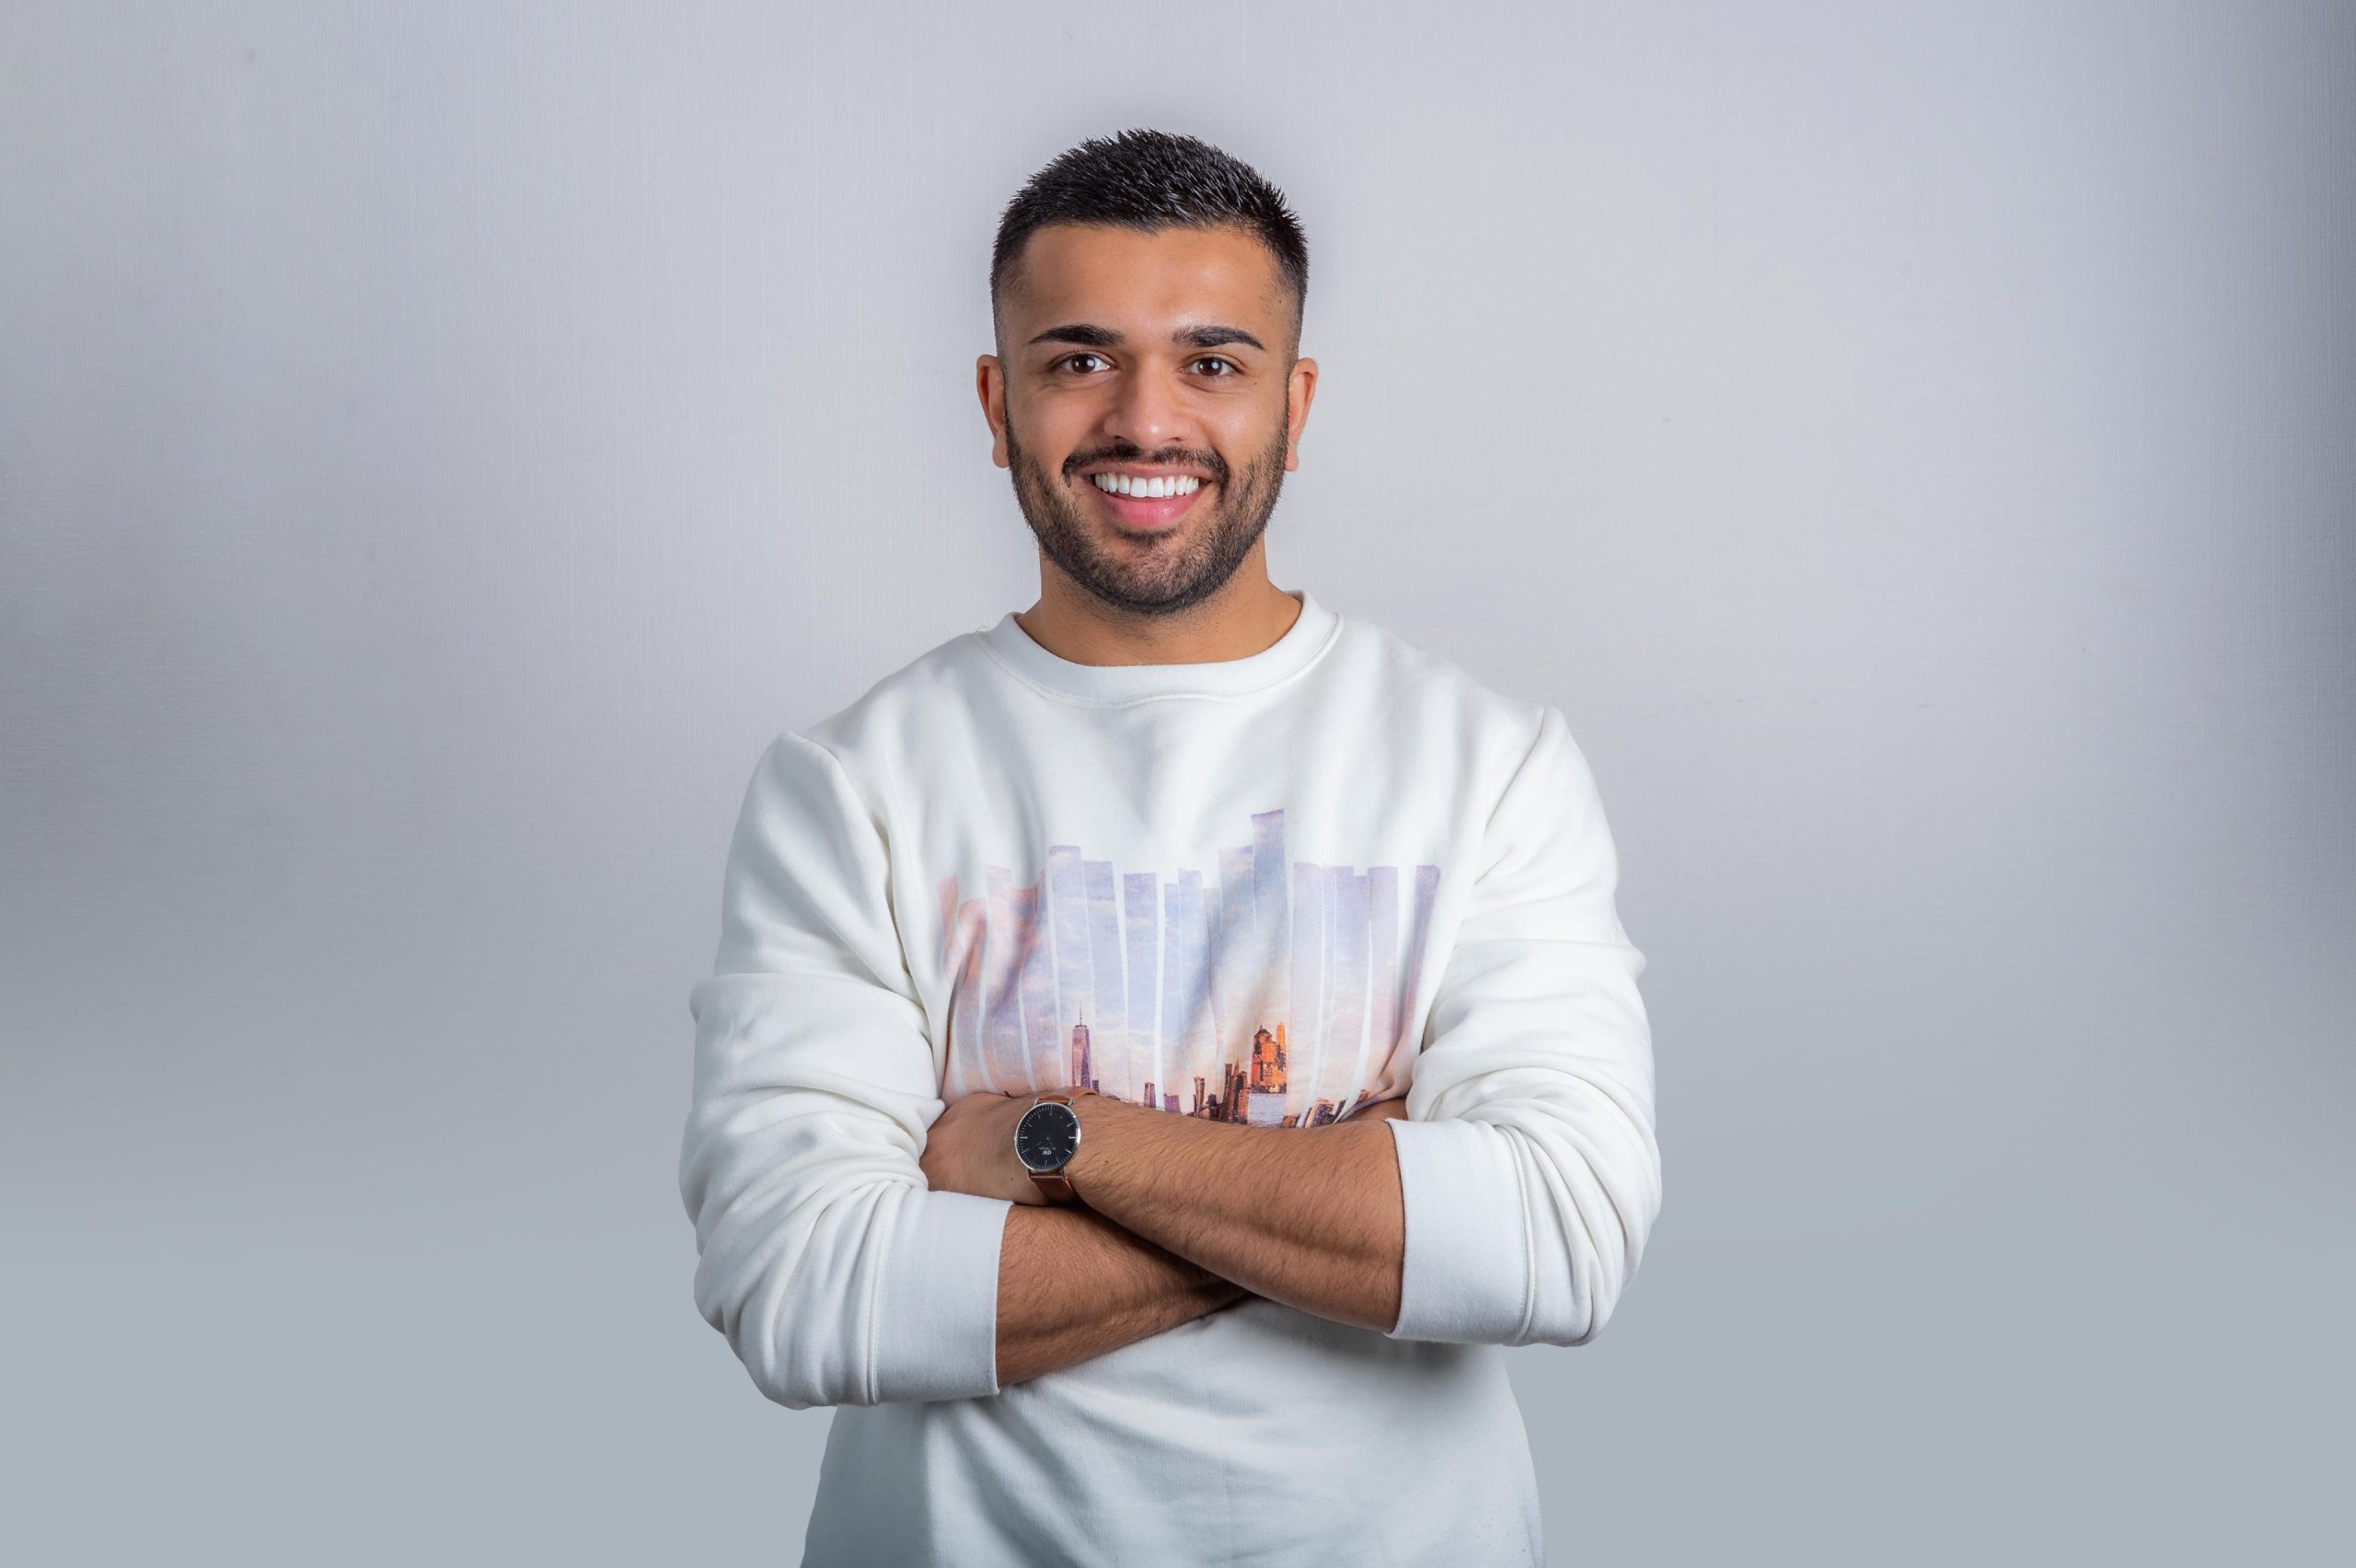 Confident young man poses with folded arms and a bright smile for headshot photography, representing a tech company, against a white background.